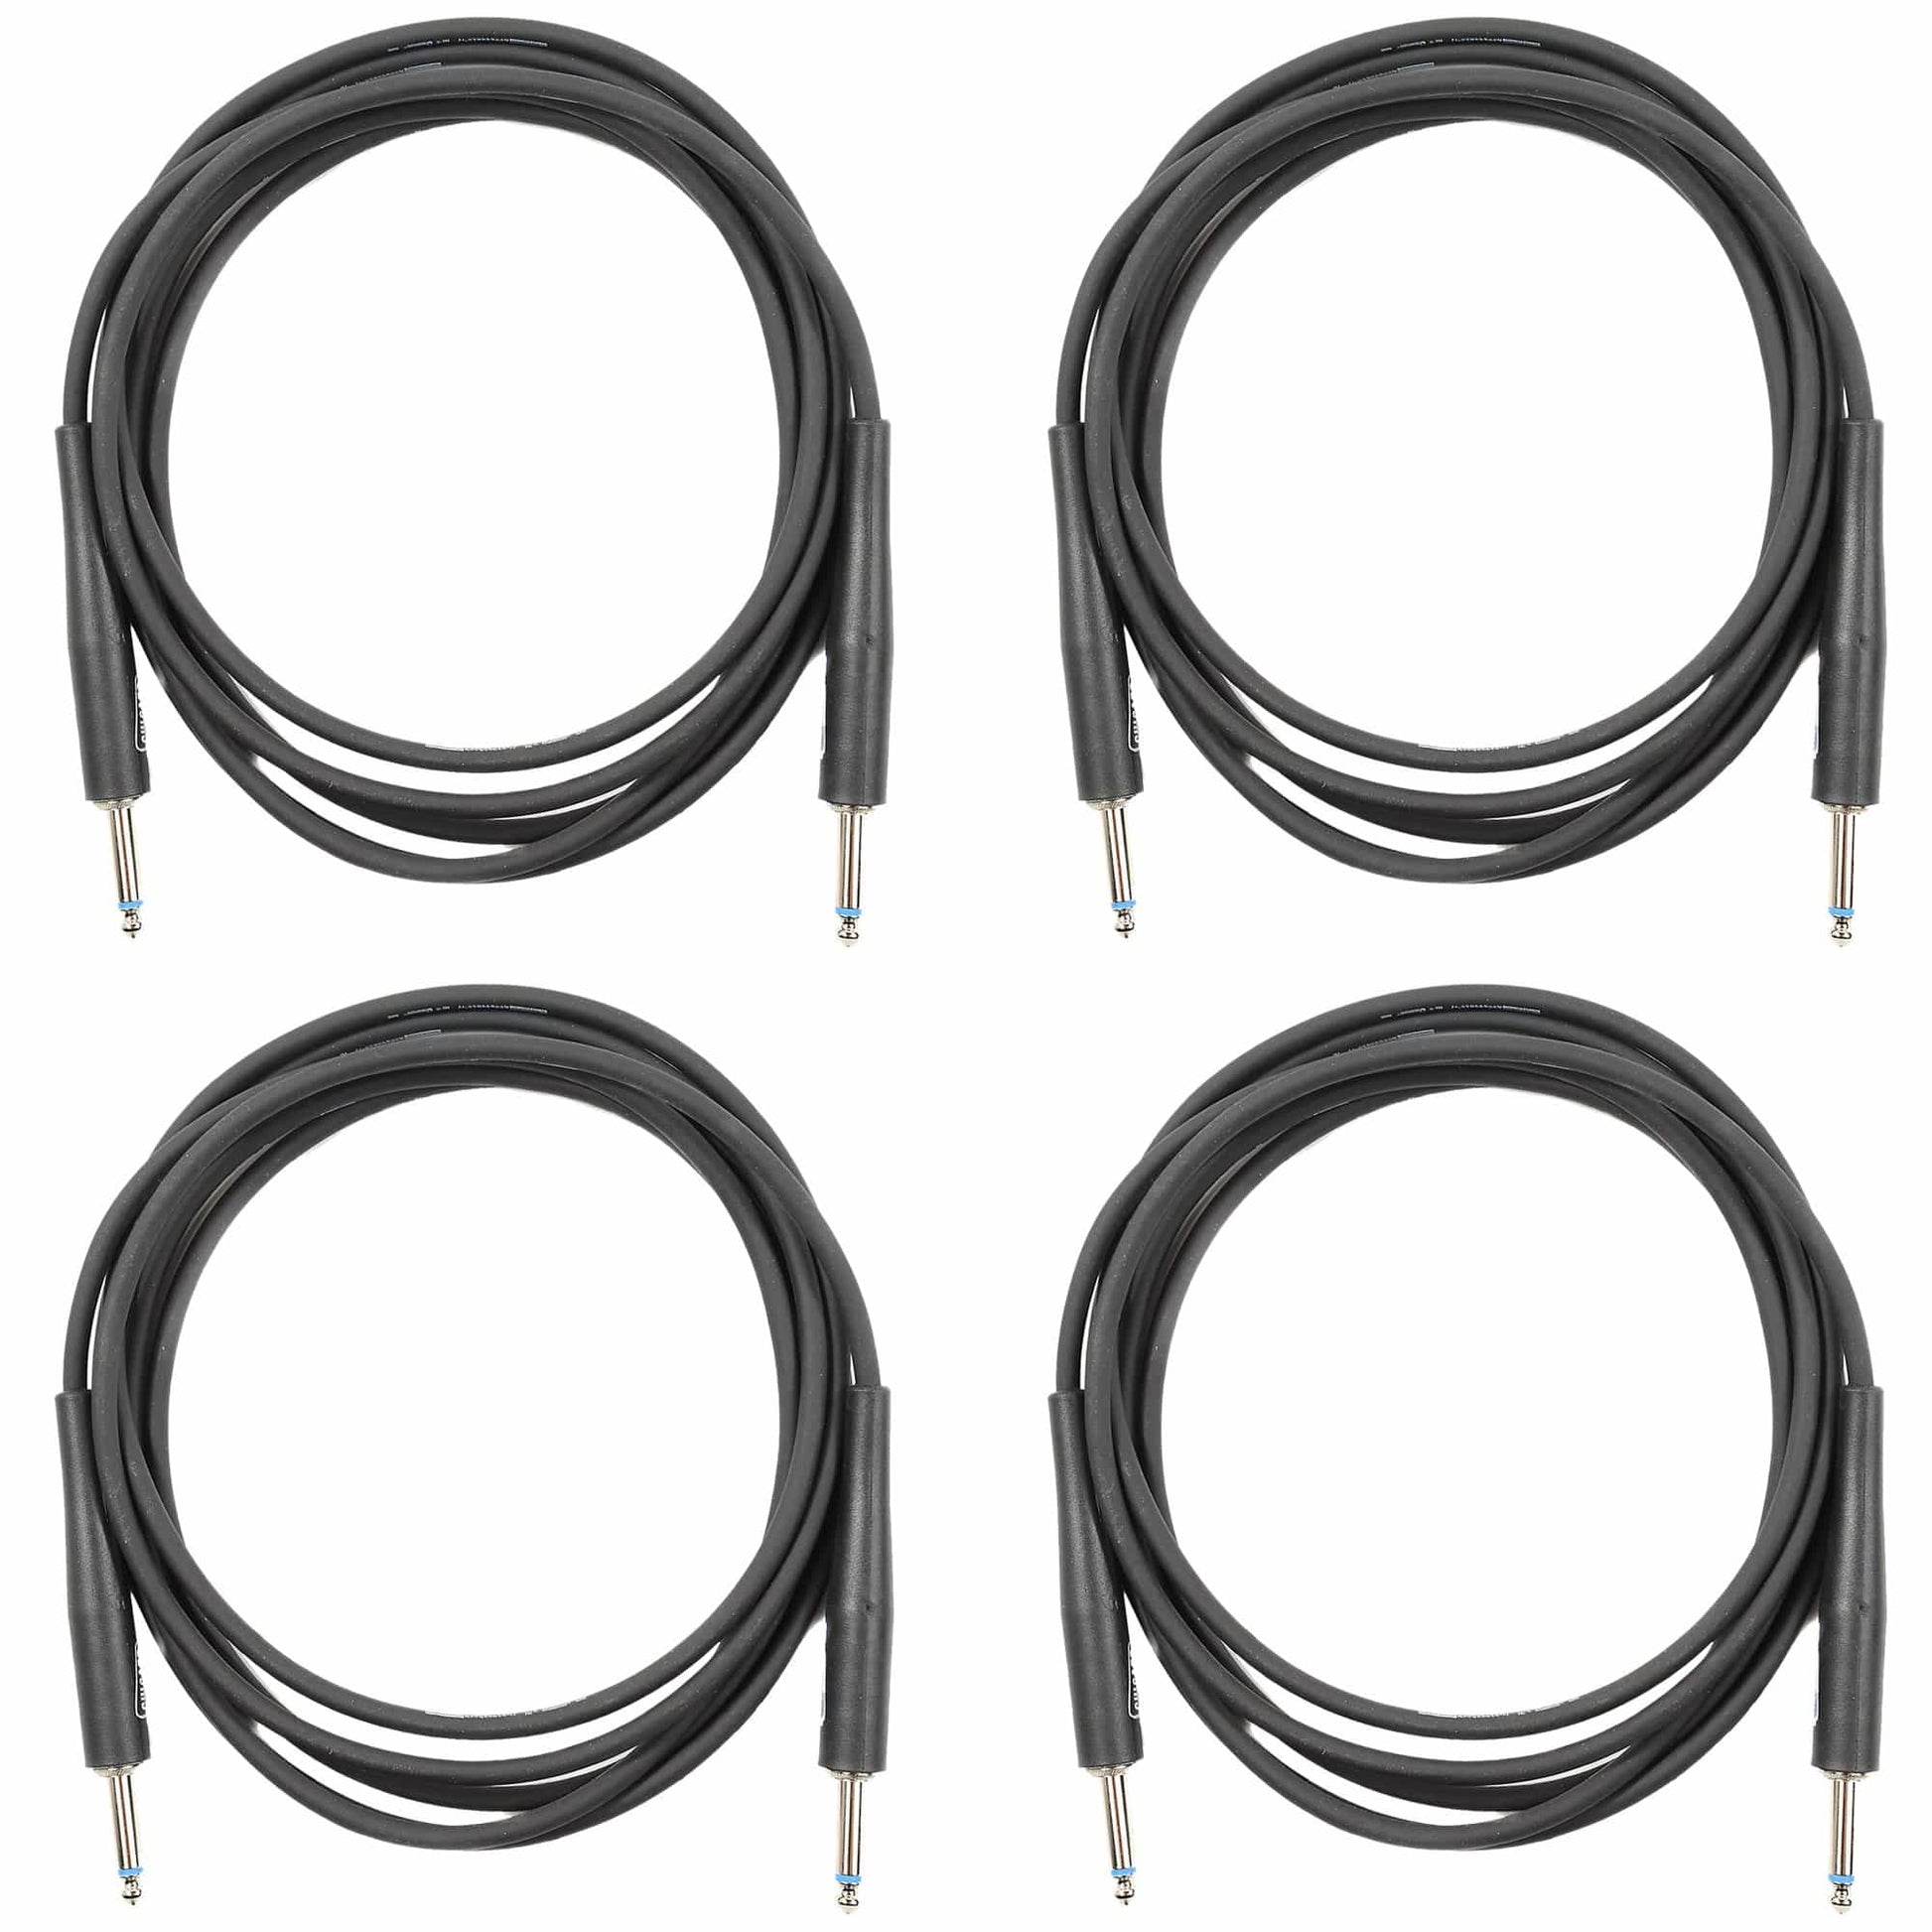 Whirlwind Leader Standard 10' Instrument Cable S/S 4 Pack Bundle Accessories / Cables